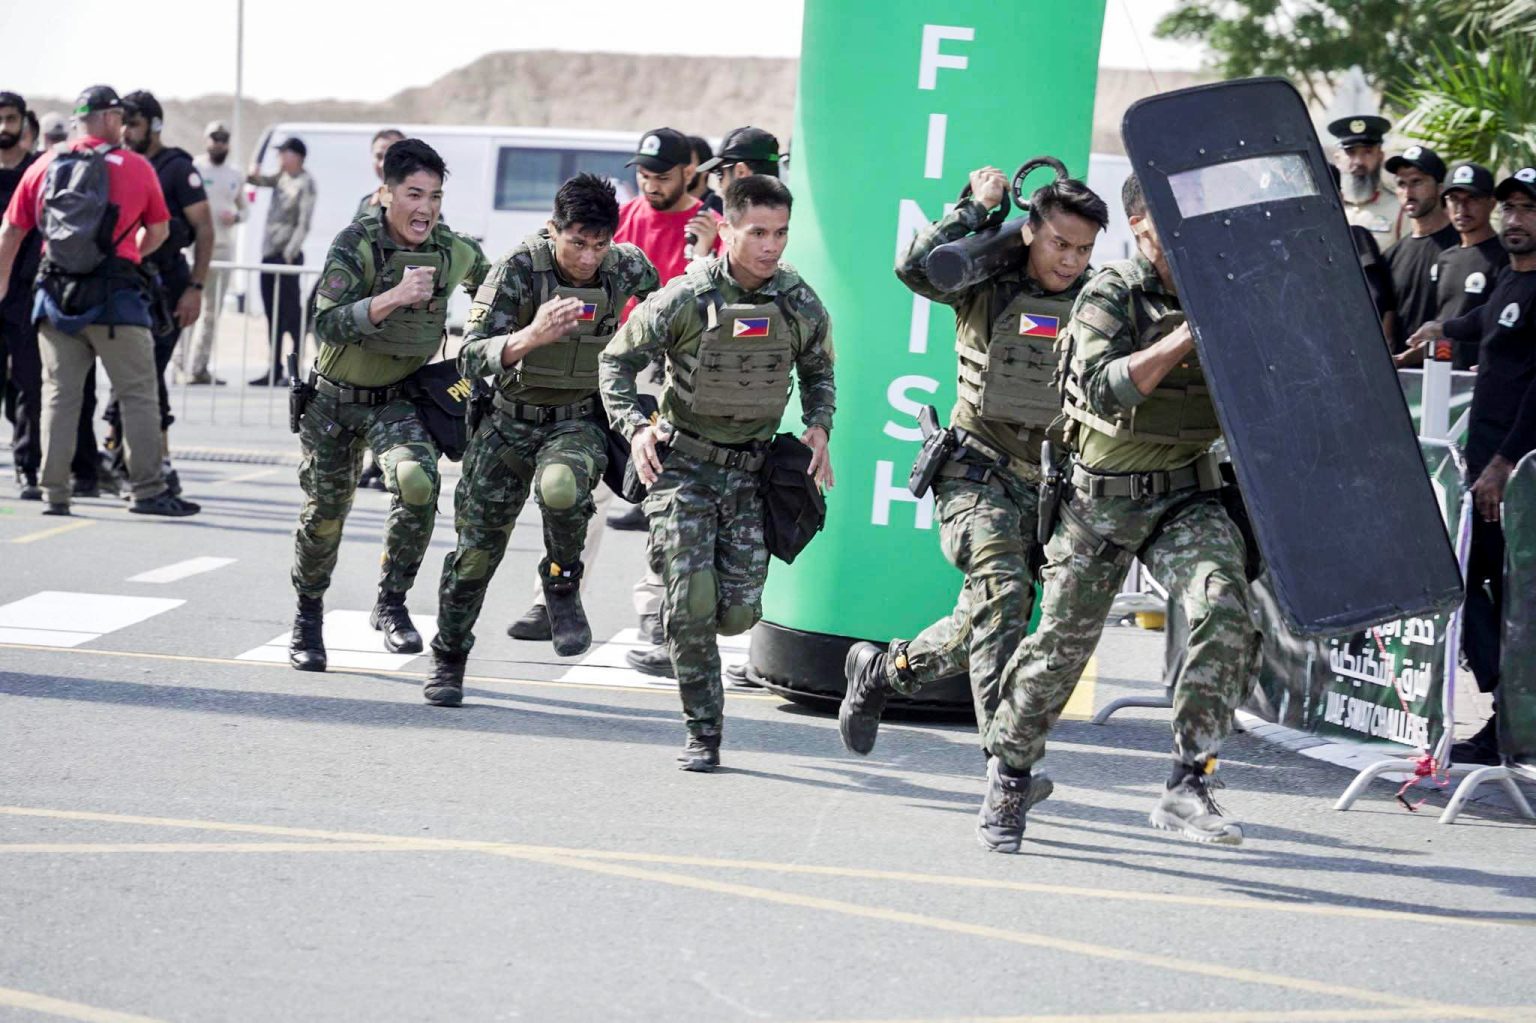 PNP Special Action Force participates in the UAE swat challenge The